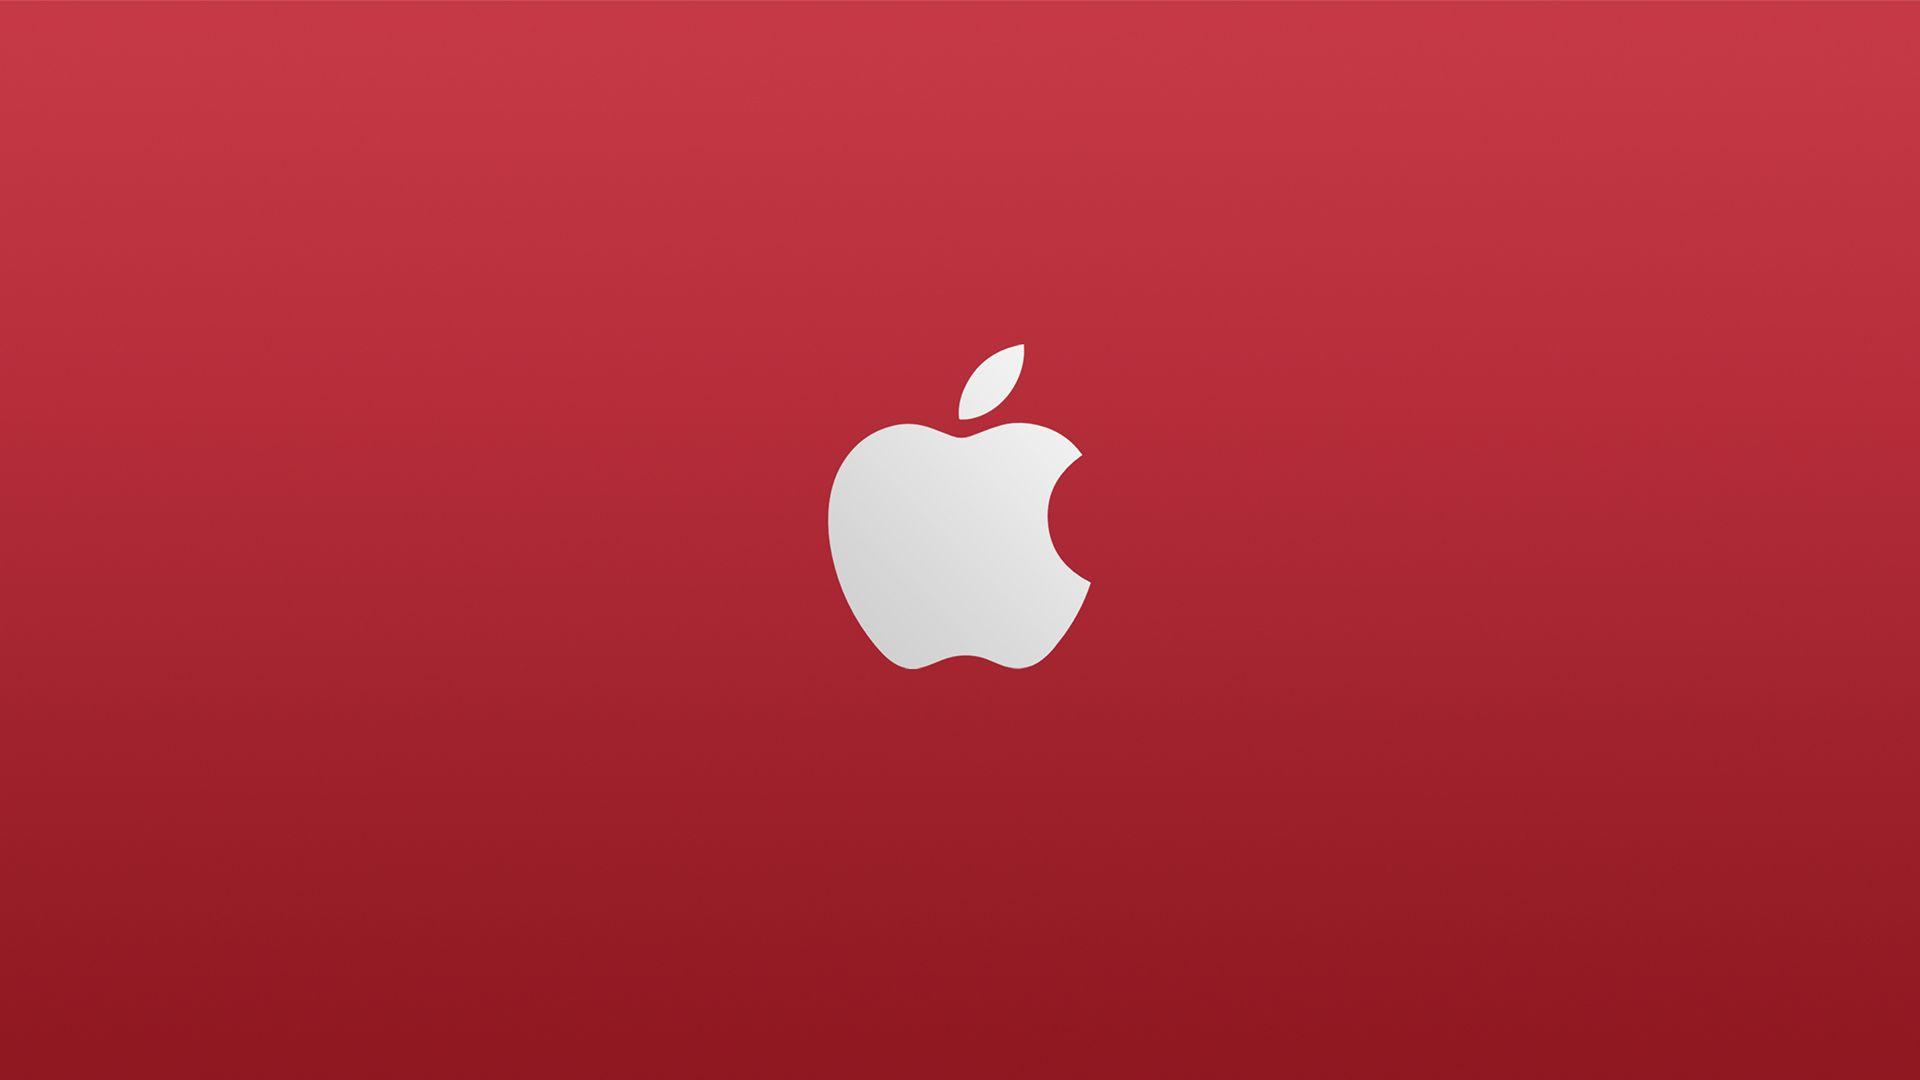 All Red Logo - Apple red Logos